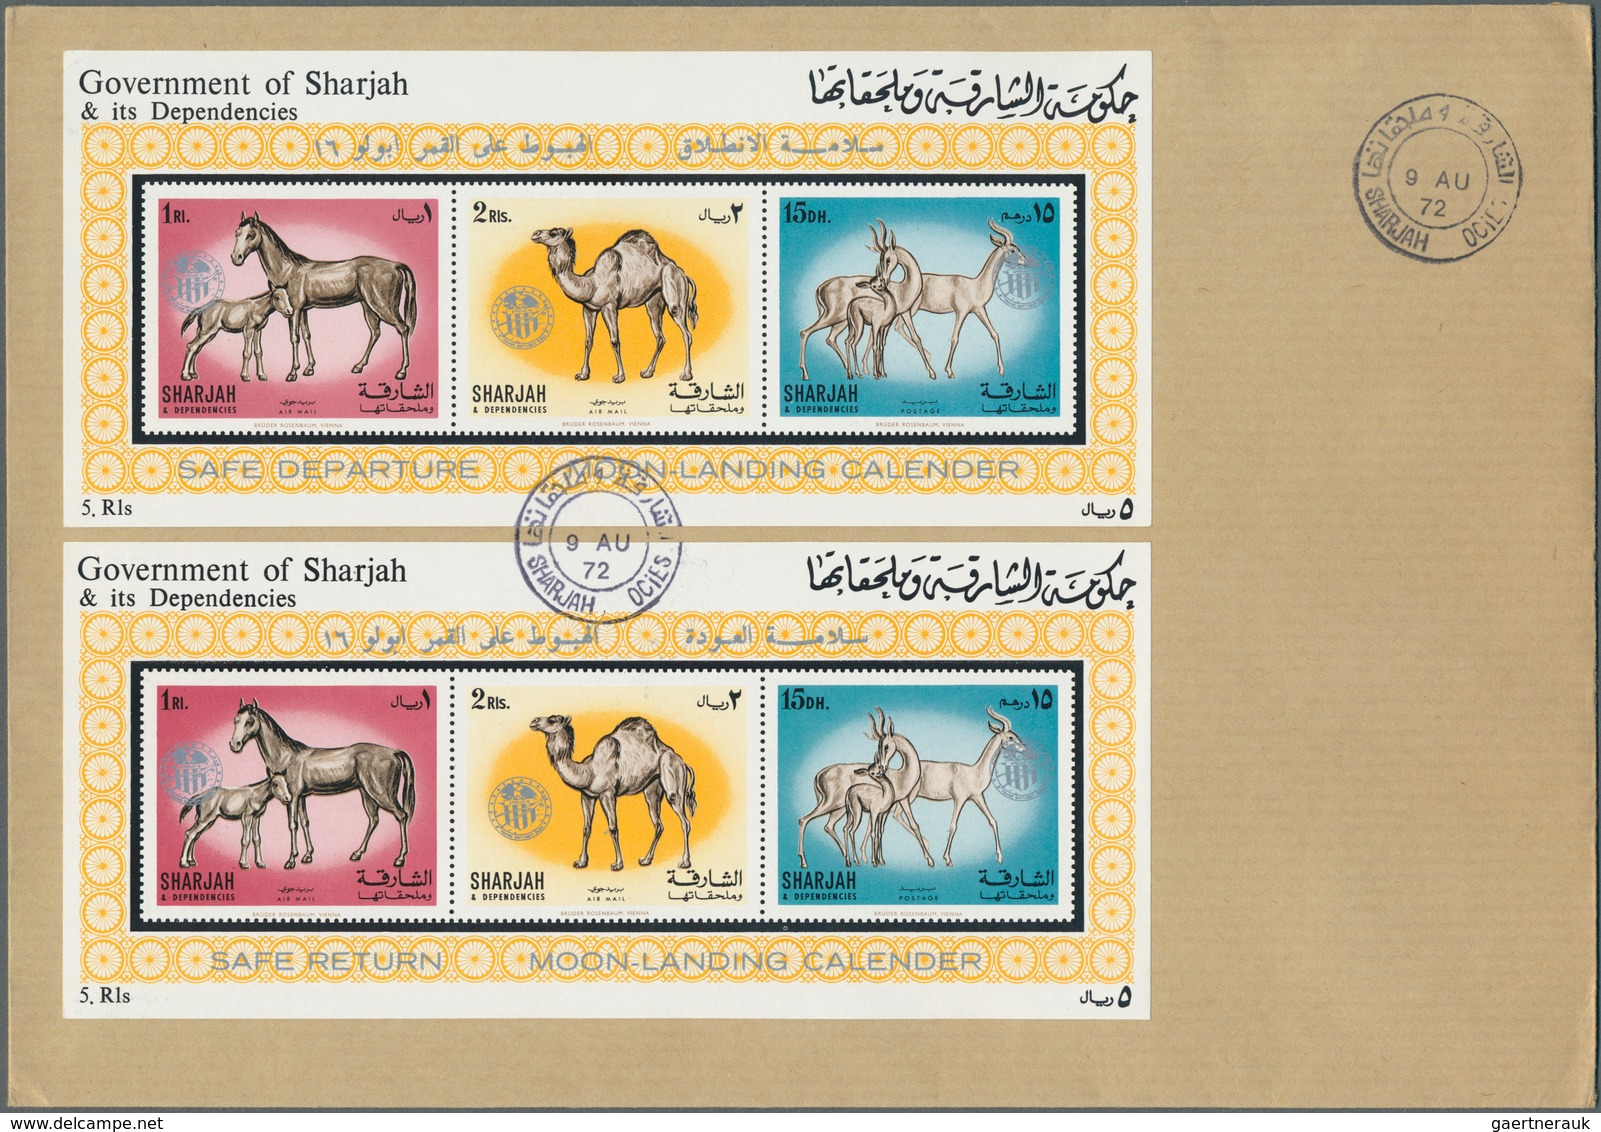 Asien: 1958/1972, ARAB STATES, group of 14 covers (mainly unaddressed envelopes) comprising Yemen, R